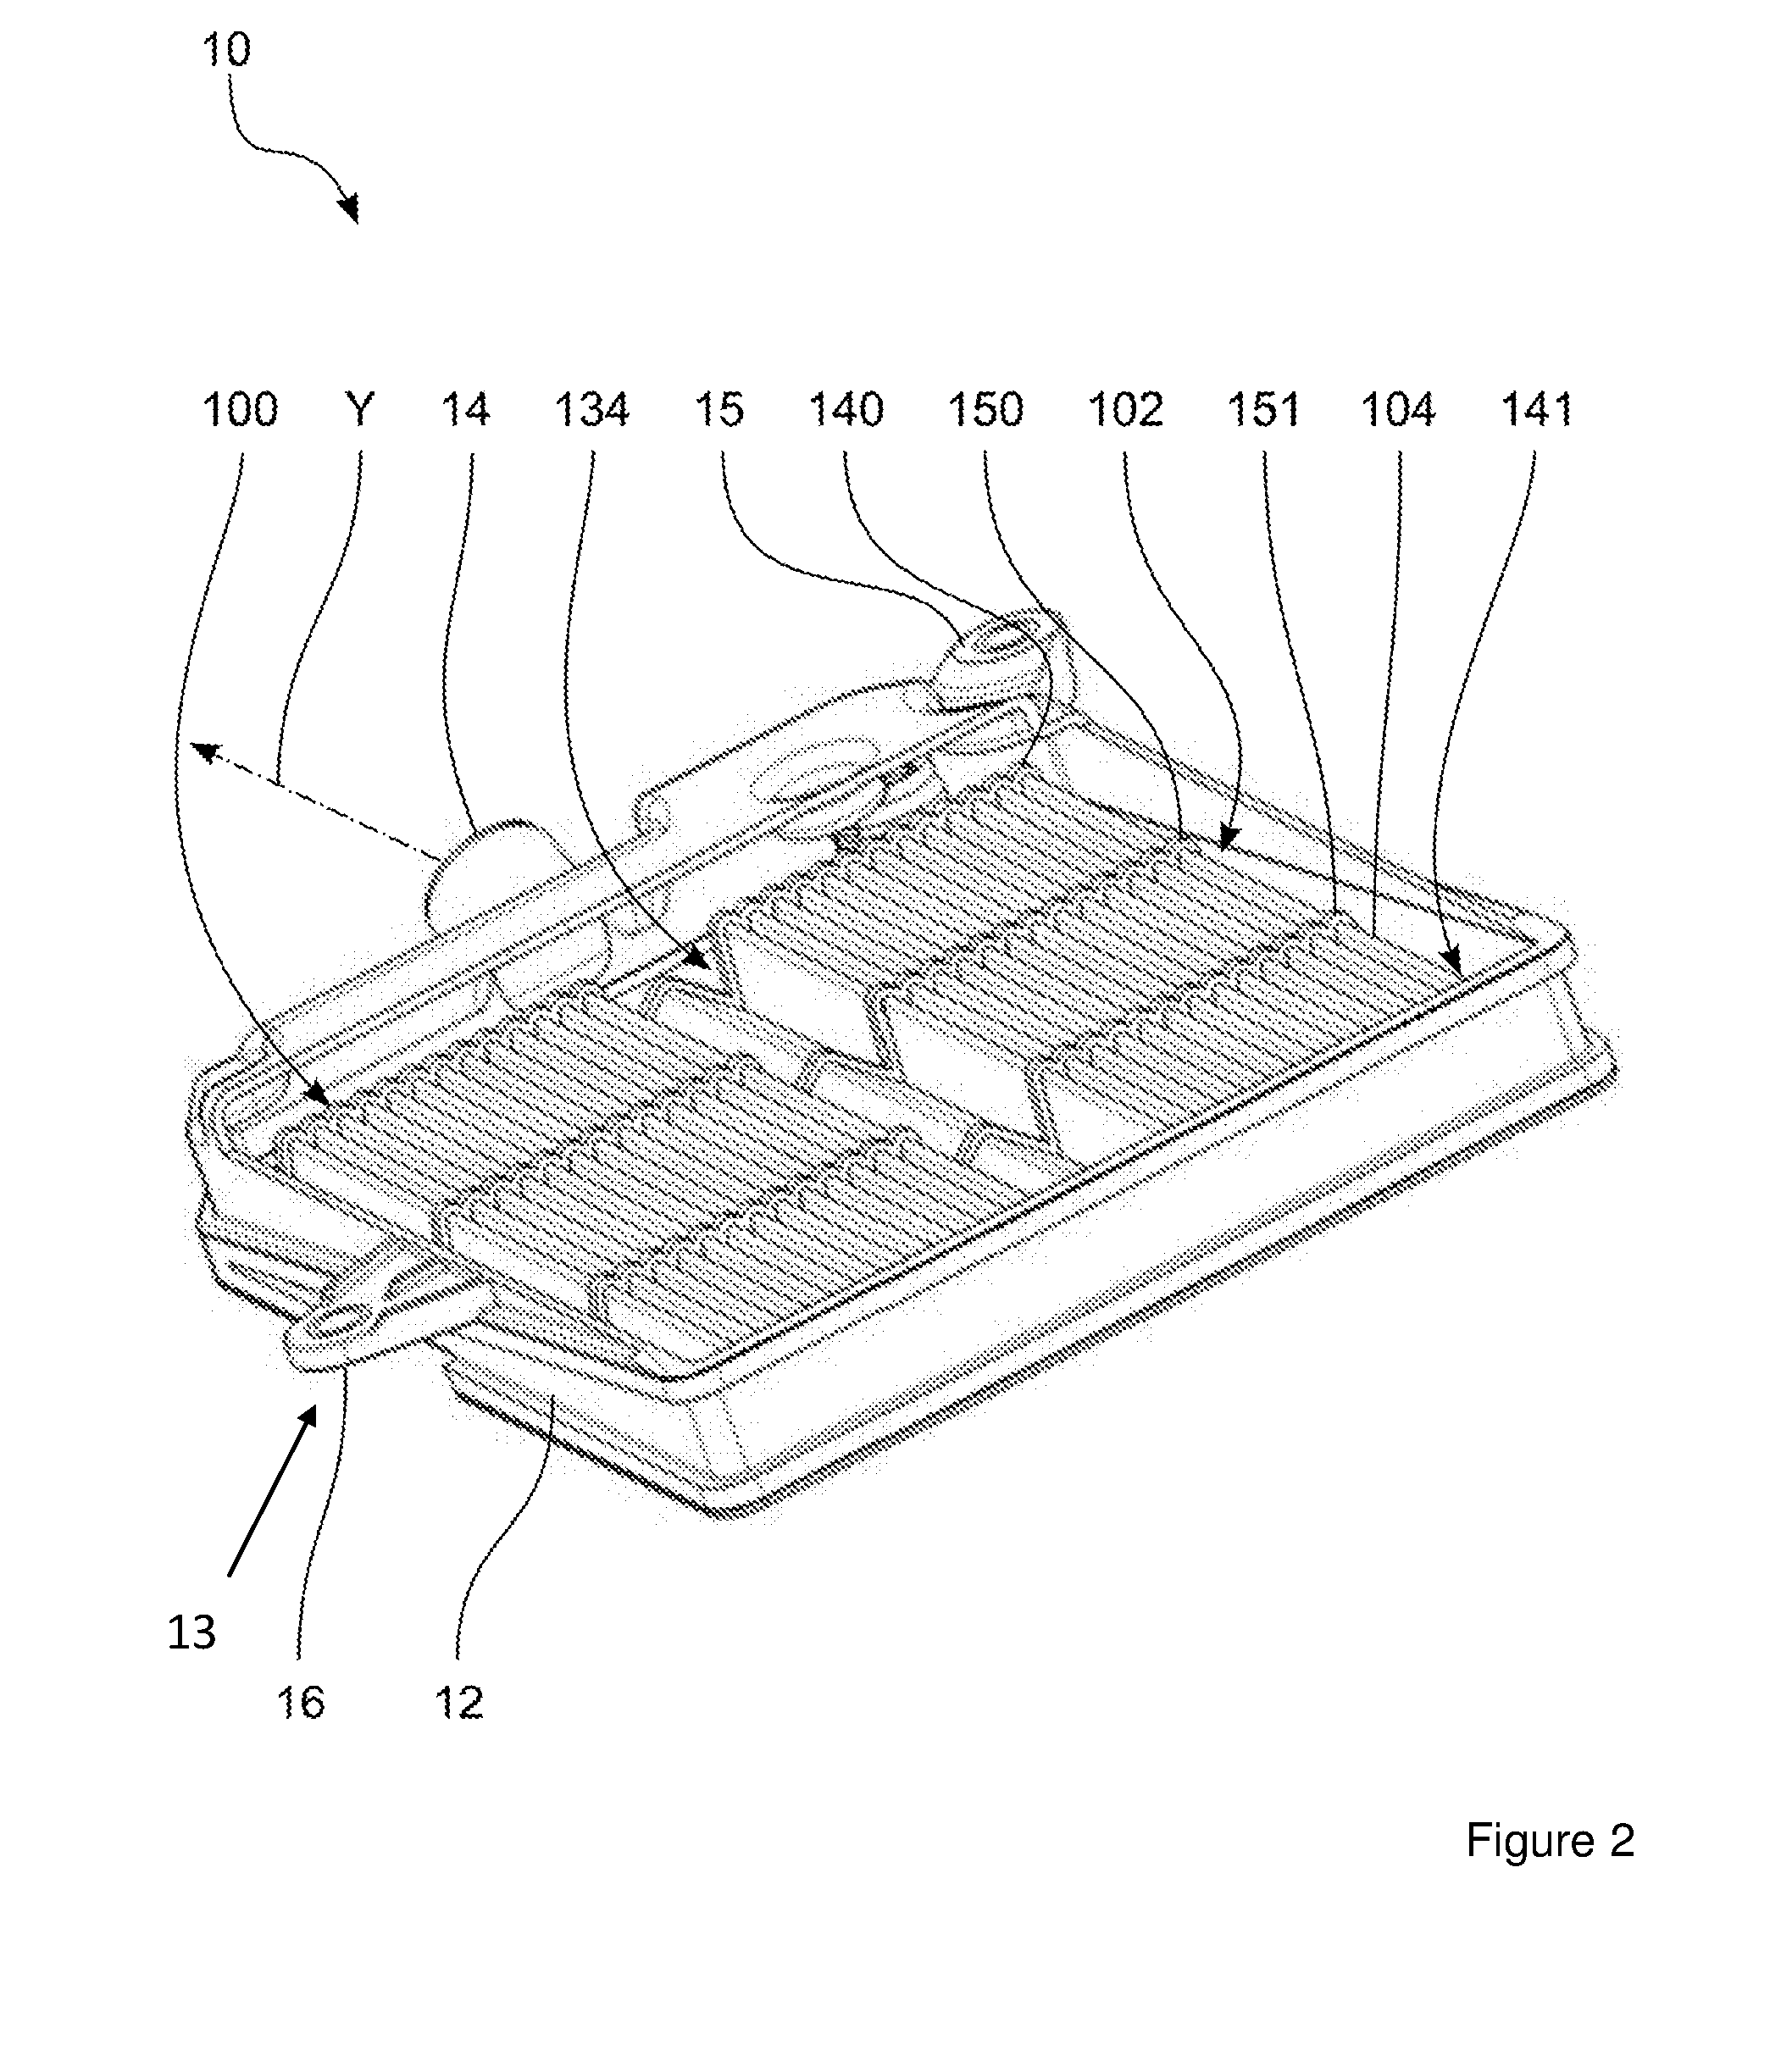 Filter Insert for a Fluid, in Particular Transmission Oil